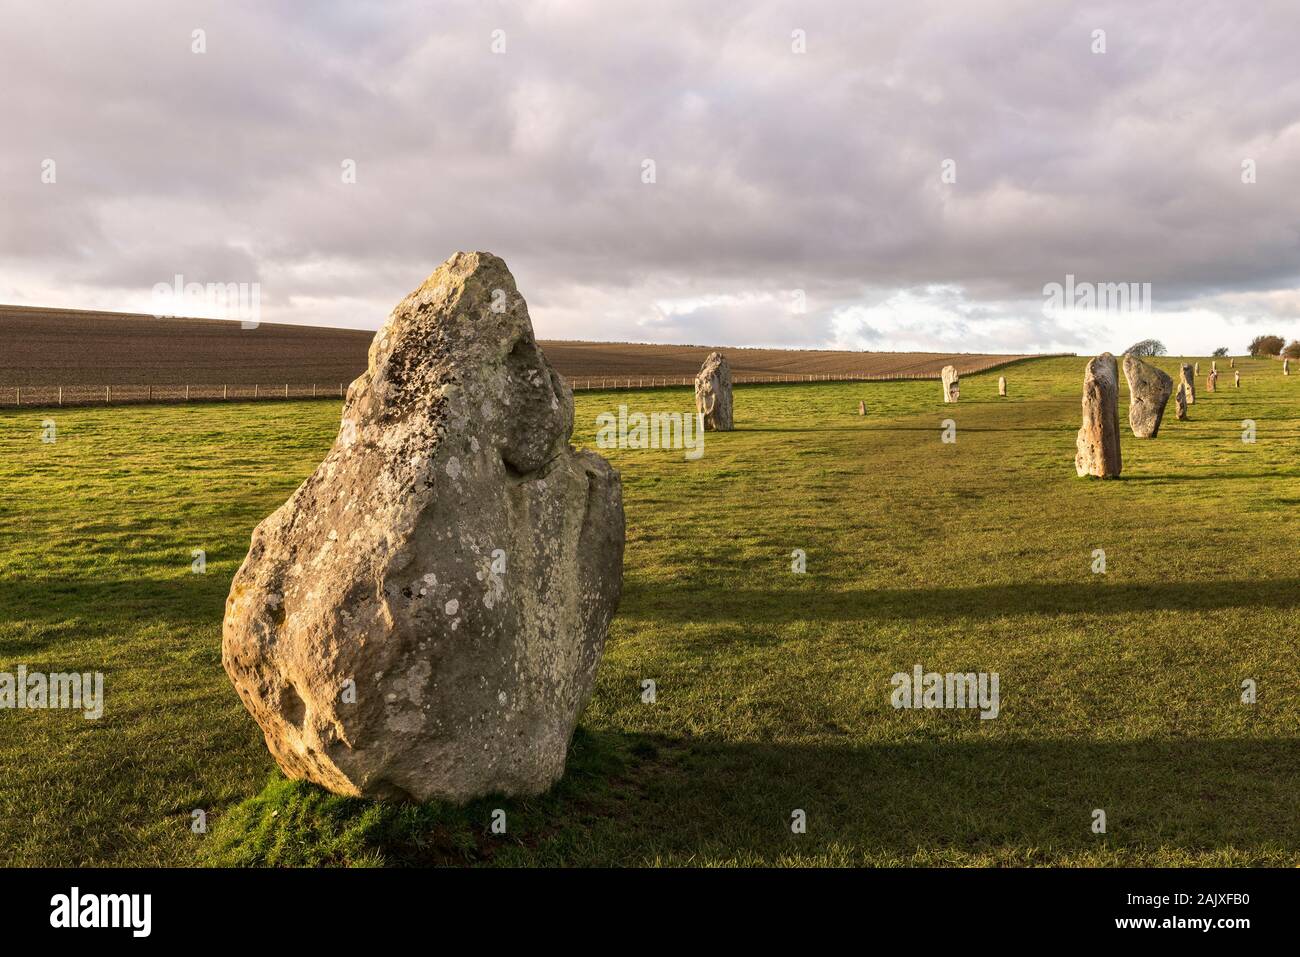 The West Kennett (or Kennet) Avenue at Avebury, Wiltshire, UK, part of a vast Neolithic henge monument built around 3000 BC. Stock Photo